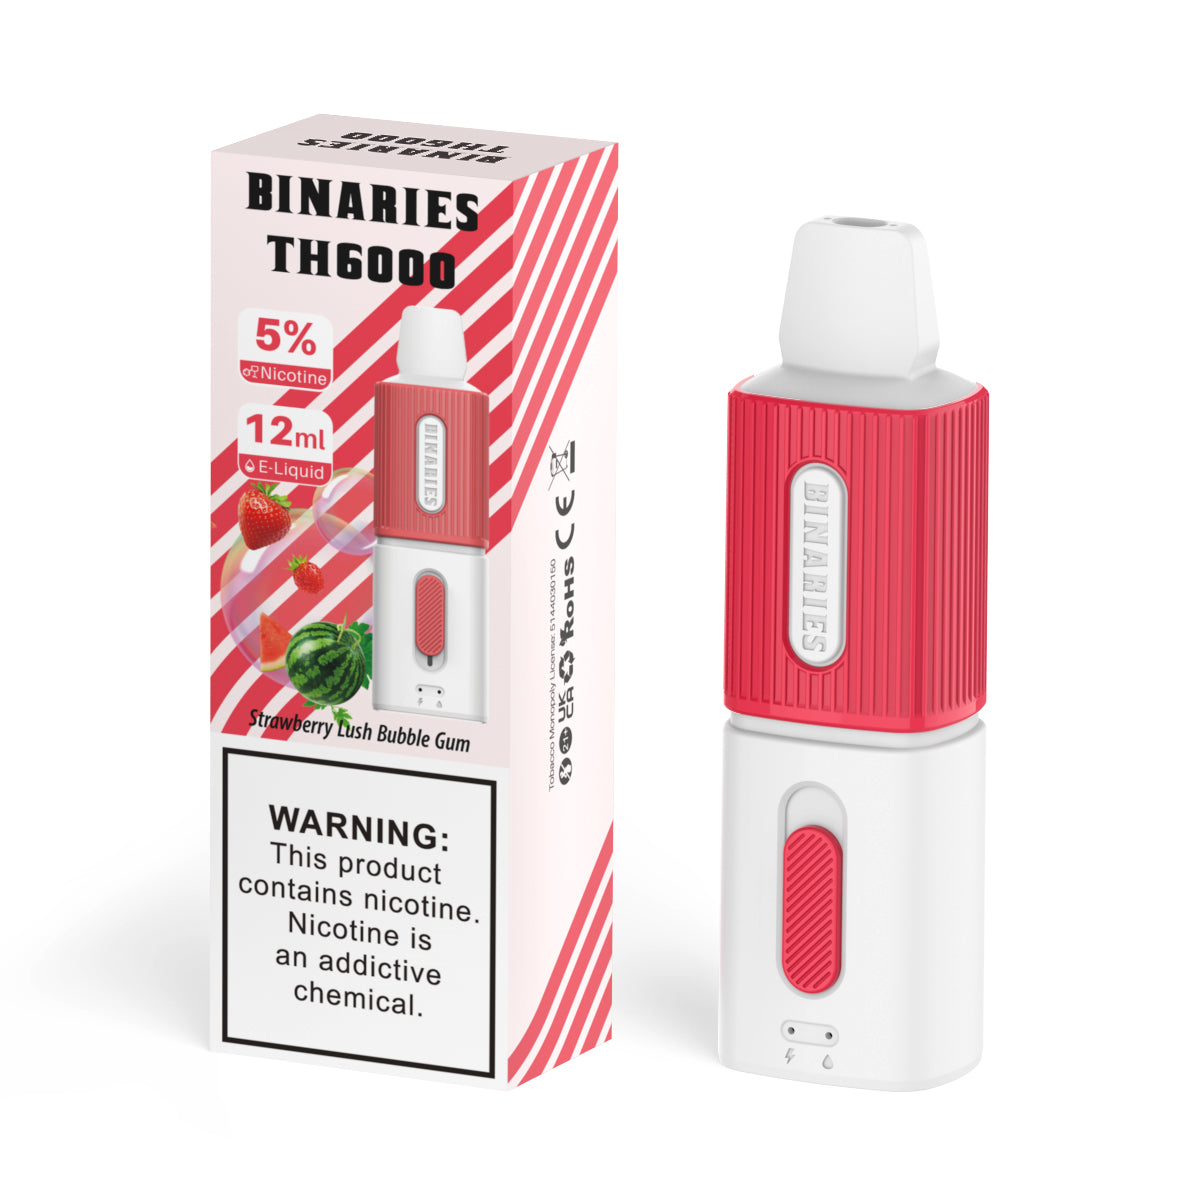 Binaries Cabin Disposable TH | 6000 Puffs | 12mL | 50mg Strawberry Lush Bubble Gum with Packaging